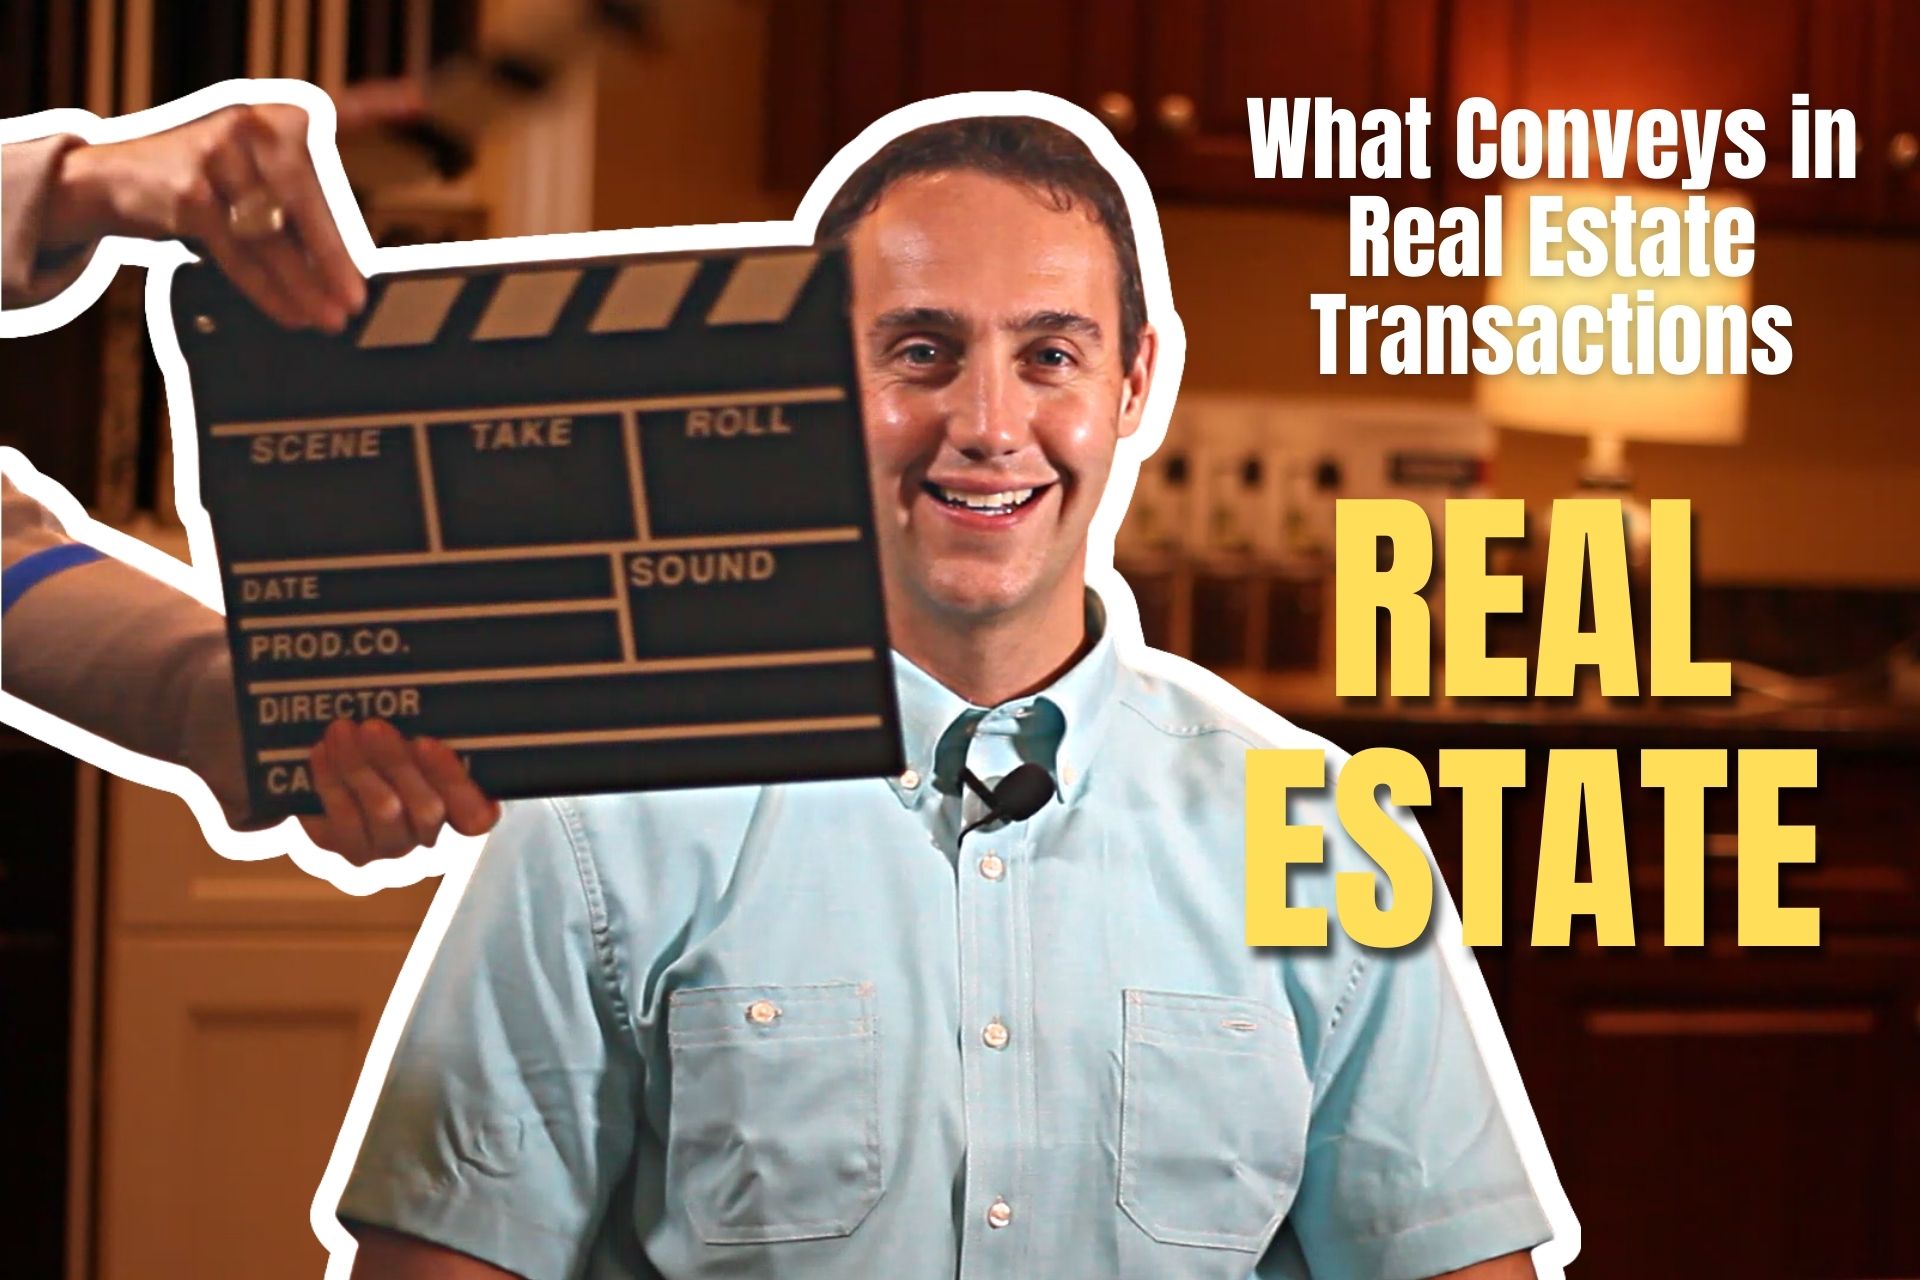 Nolan Formalarie - What Conveys in Real Estate Transactions